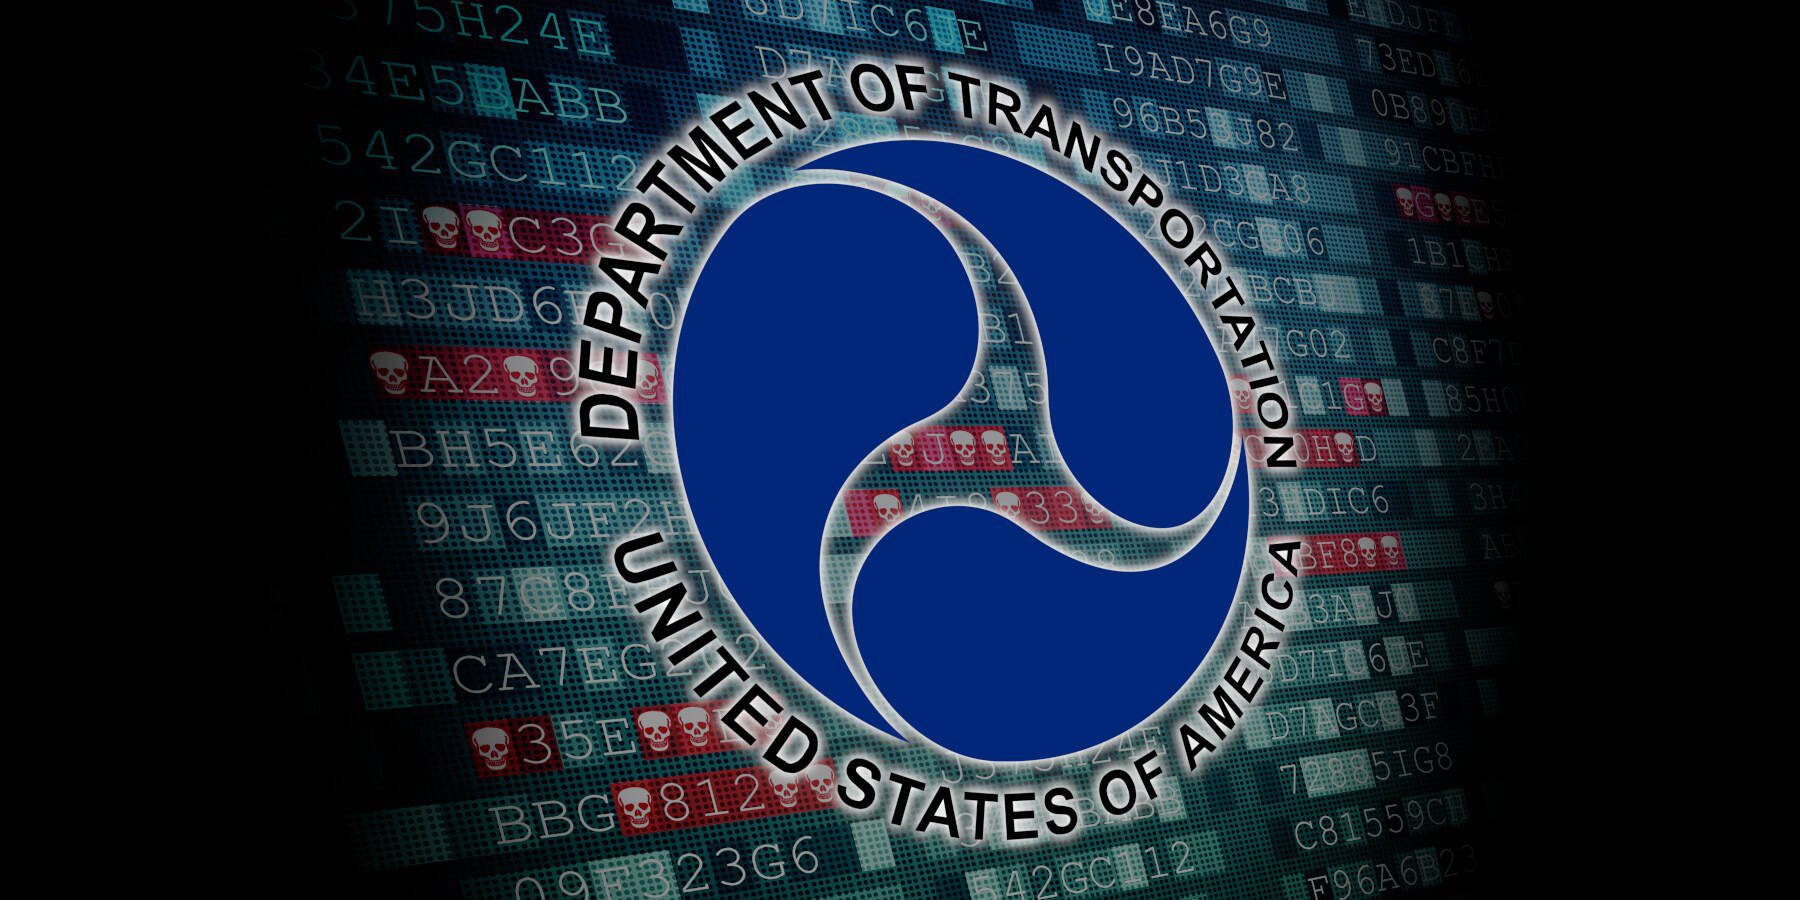 US Dept of Transport security breach exposes info on a quarter-million people – Source: go.theregister.com